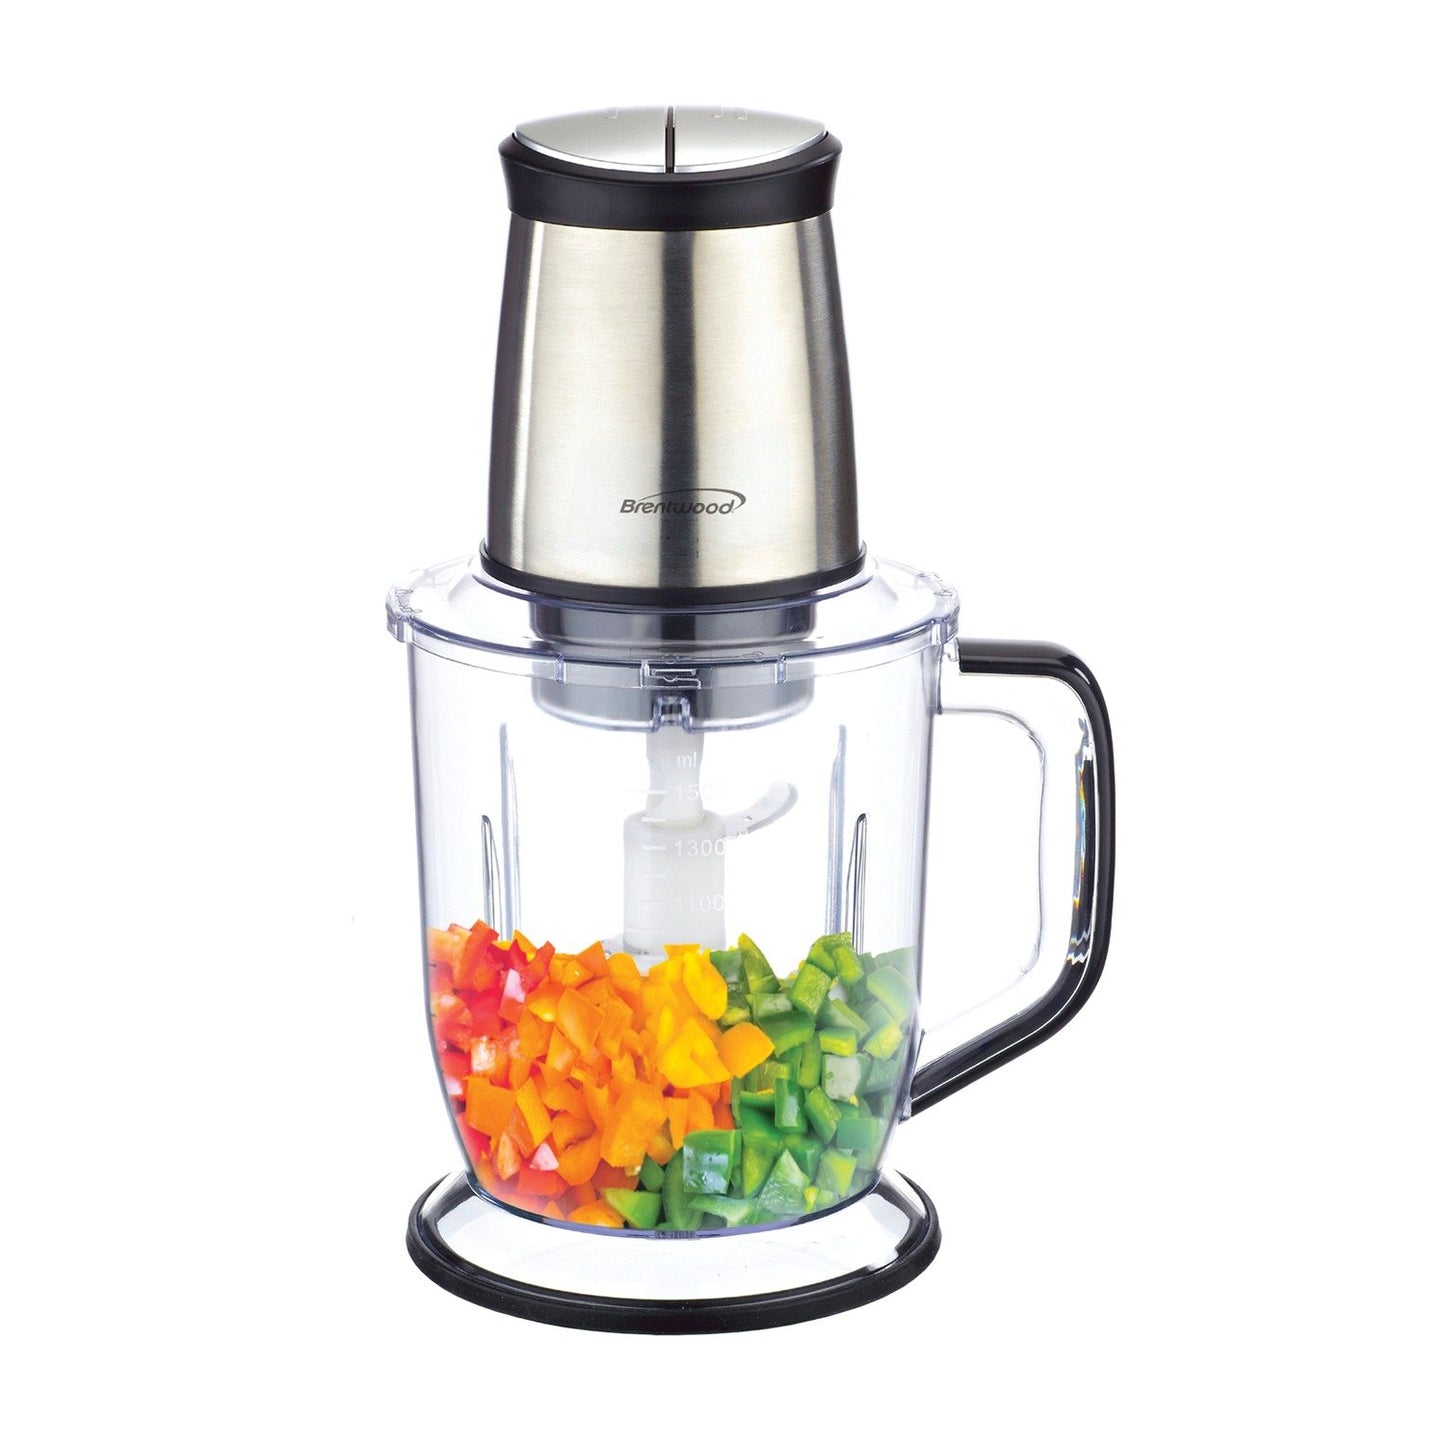 Brentwood Appl. FP-544S 300W 4-Blade 6.5-Cup Food Processor